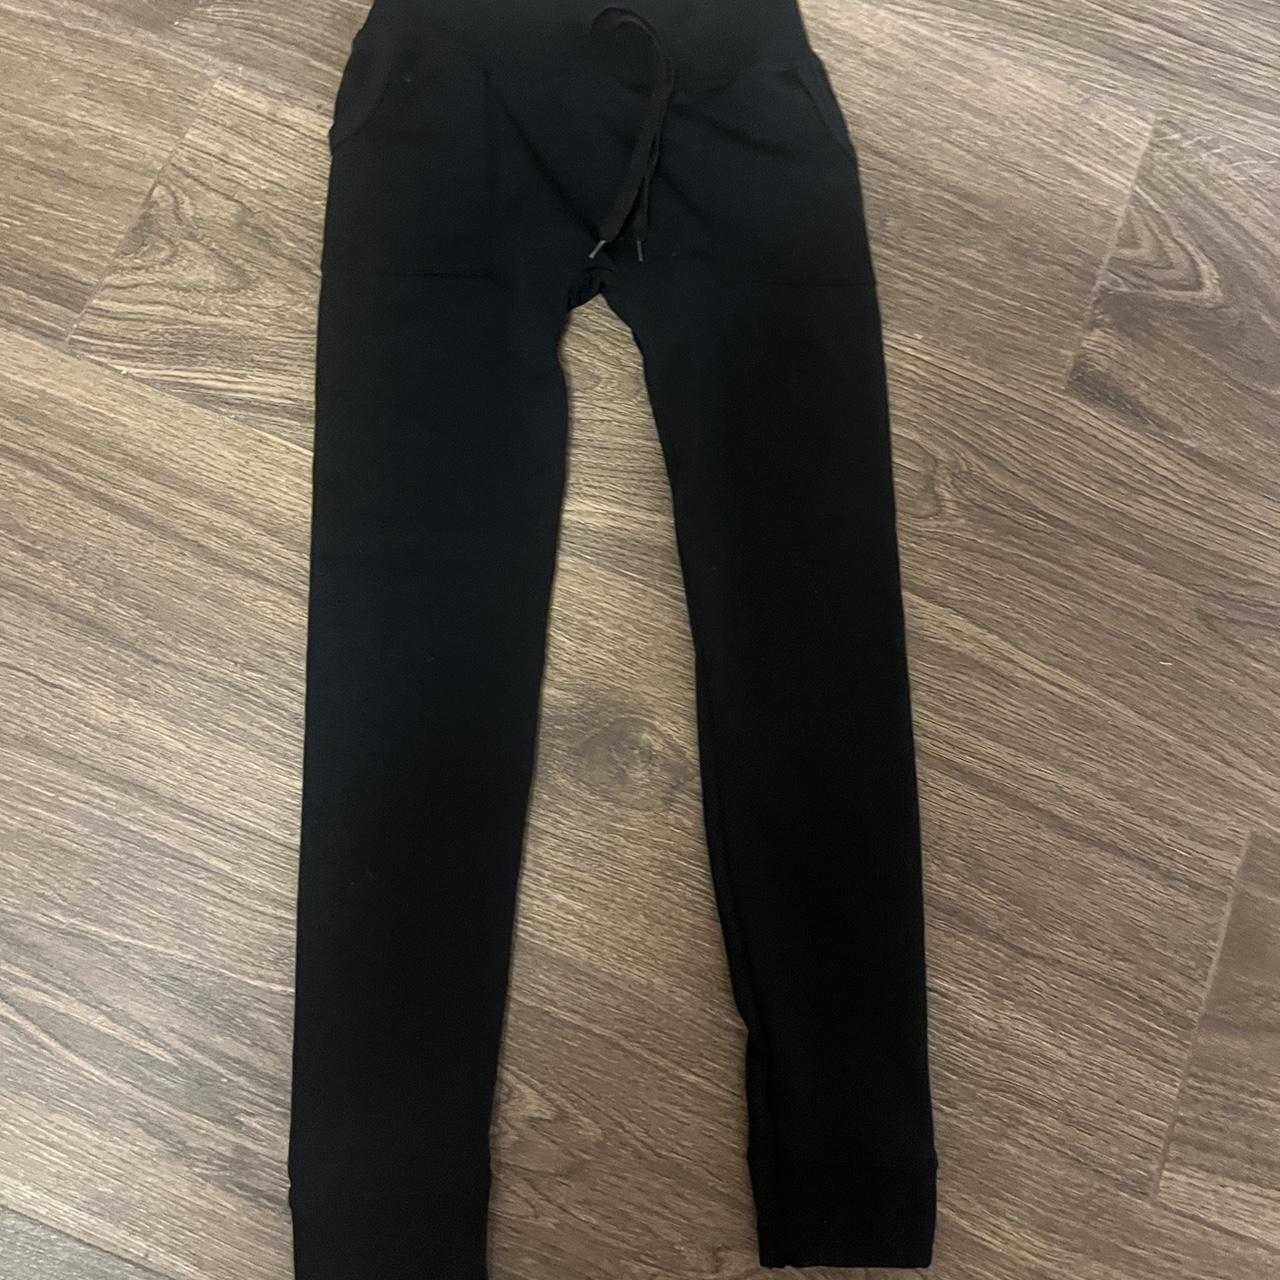 Girls fitted joggers size small/ medium - Depop